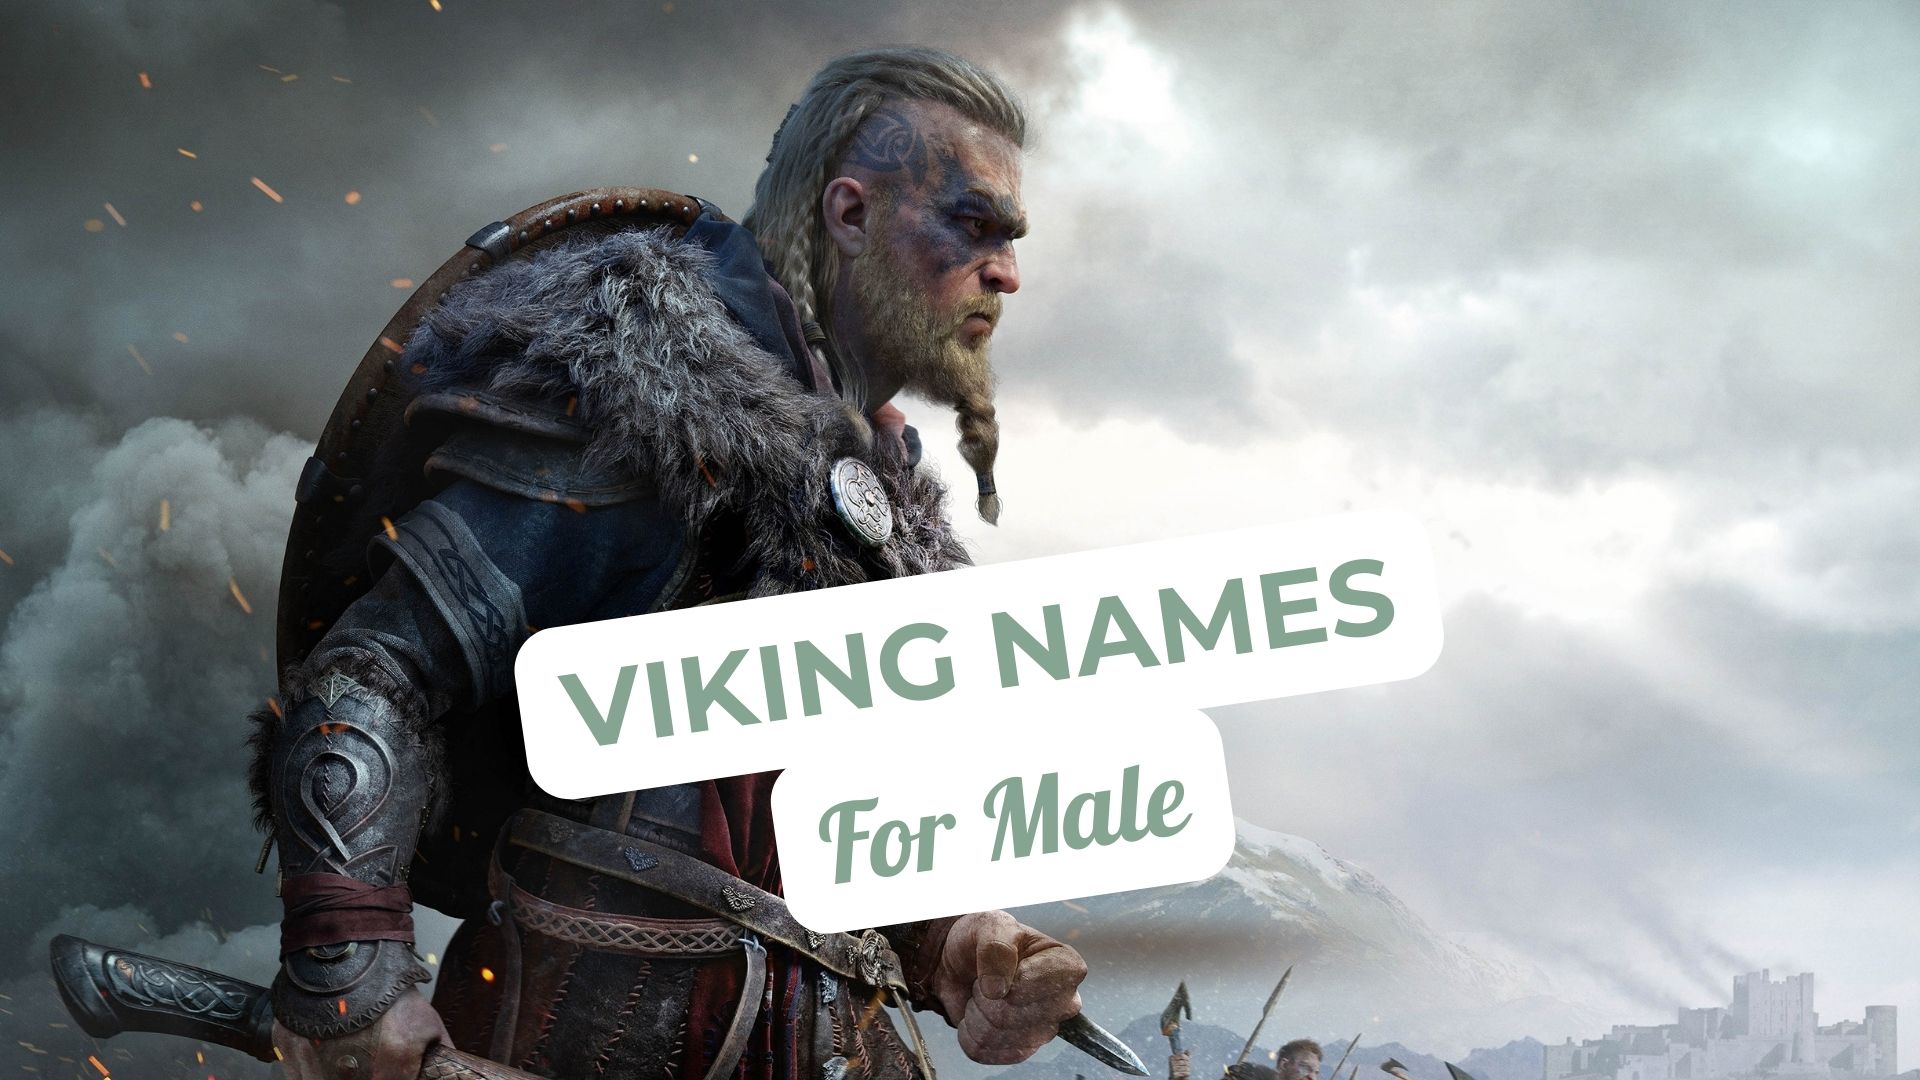 Traditional Viking Names for Male